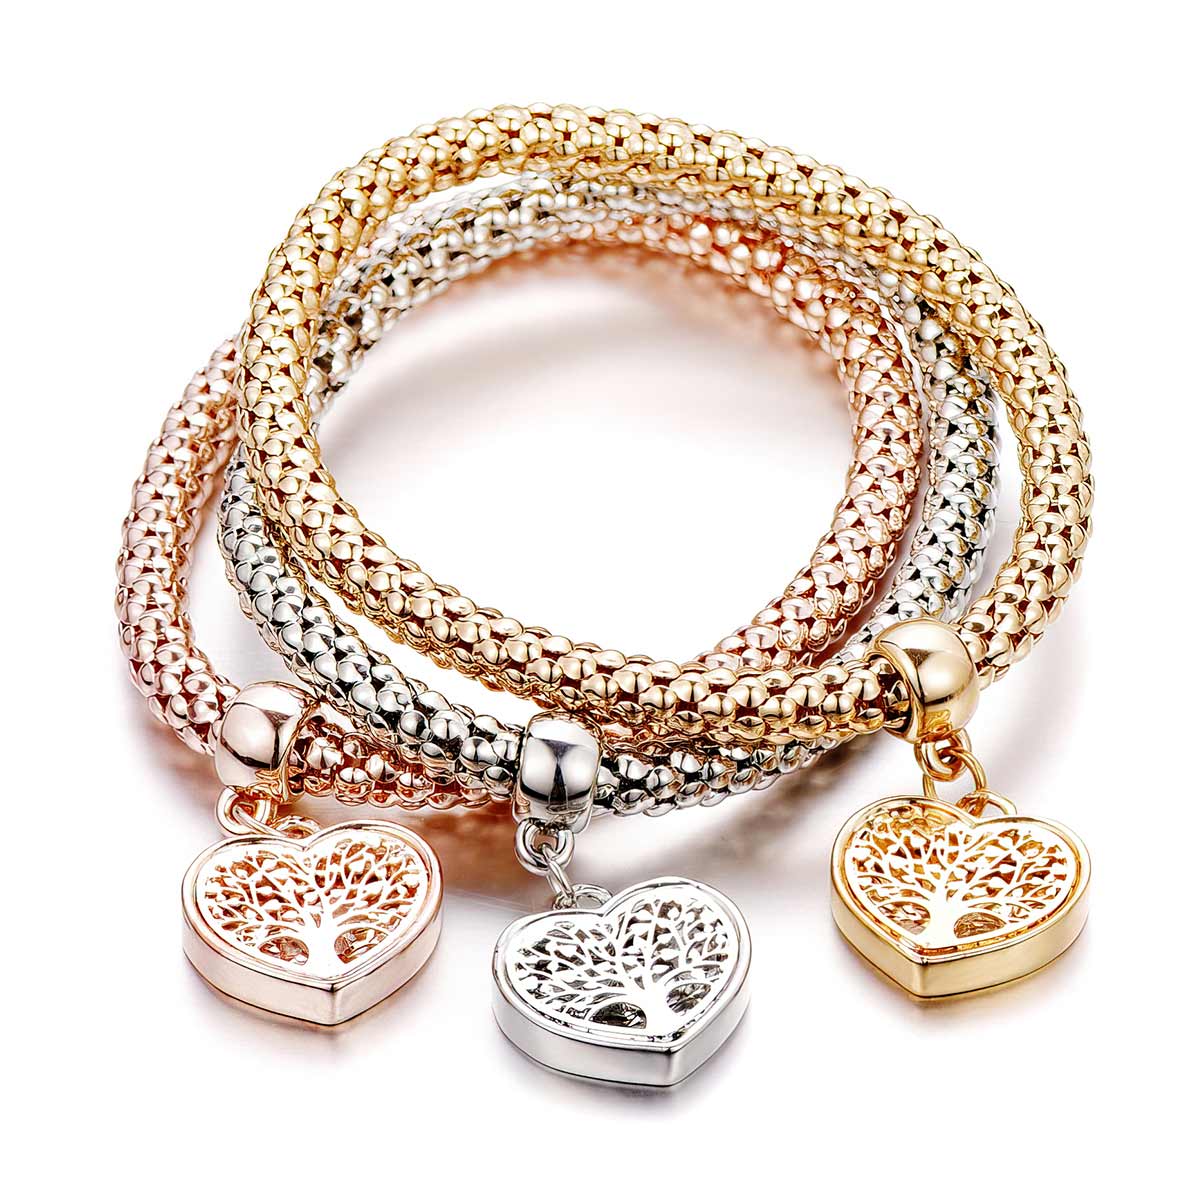 Tree of Life Heart Edition Charm Bracelet With Free Matching Earrings ($30 Value)